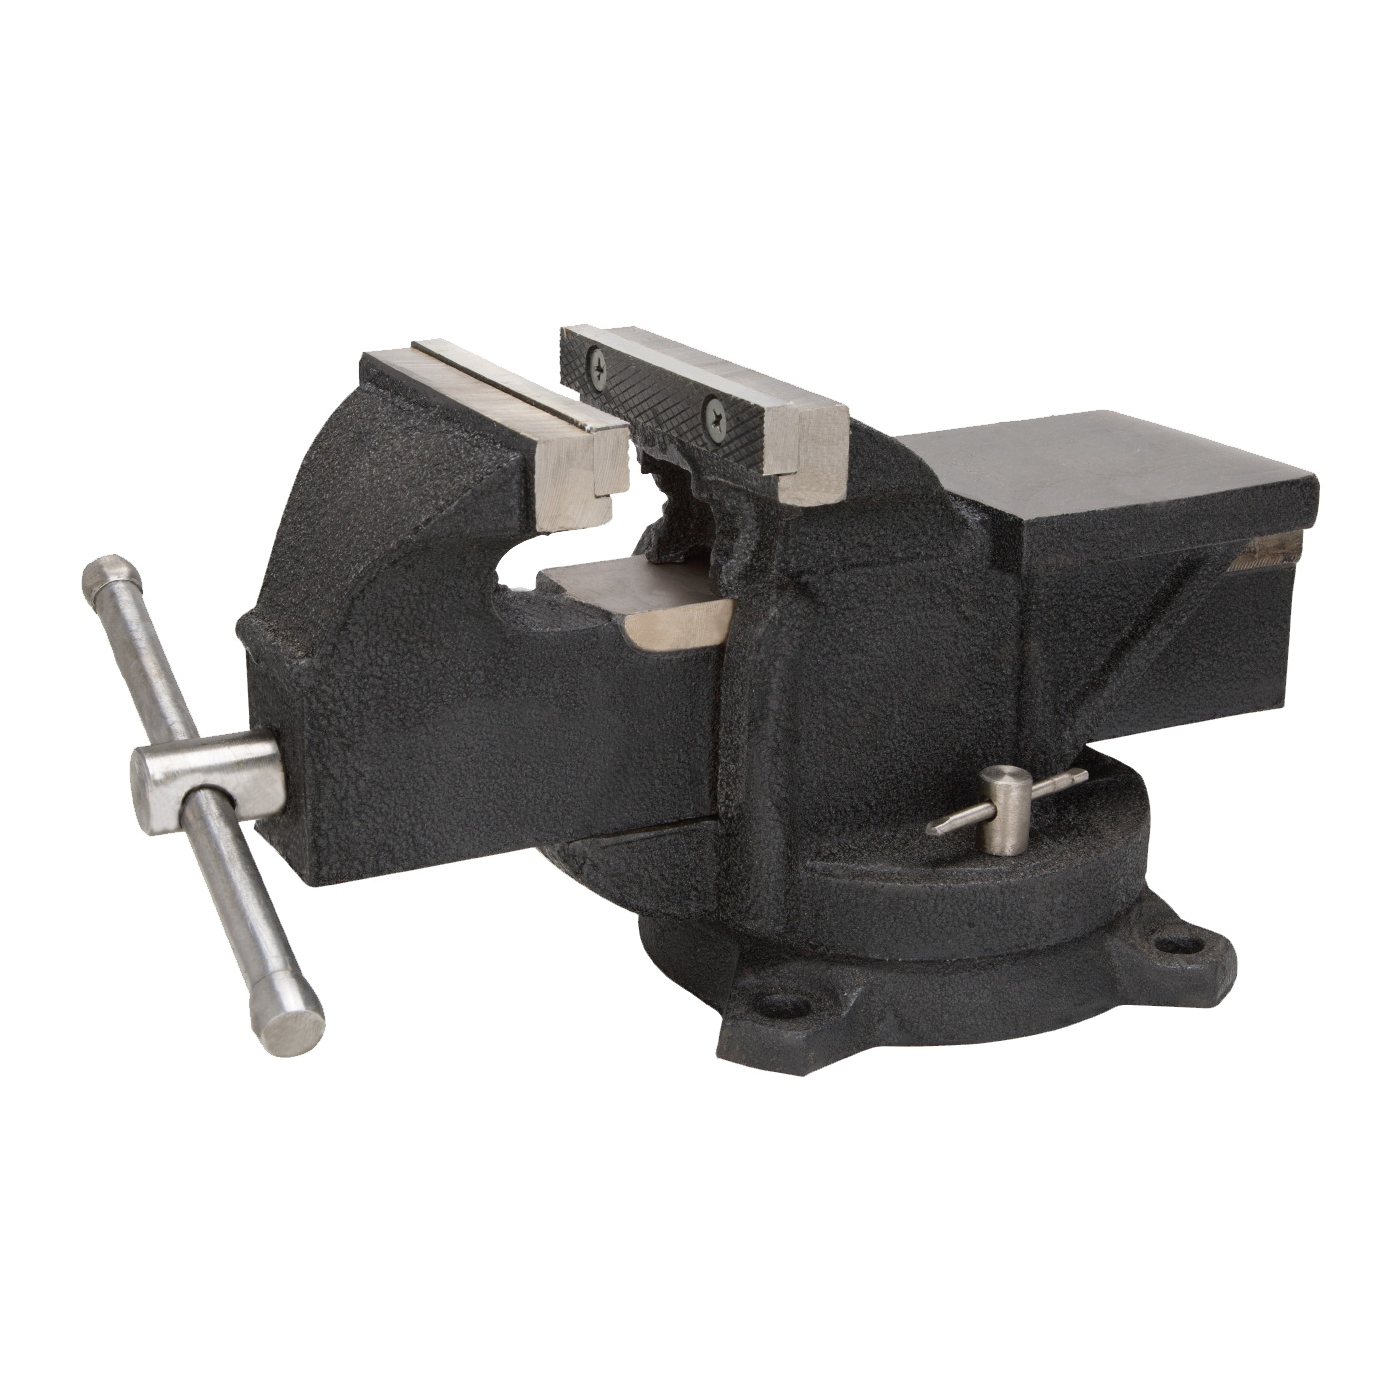 JL25013 Bench Vise, 6 in Jaw Opening, 1/2 in W Jaw, 3 in D Throat, Cast Iron Steel, Serrated Jaw